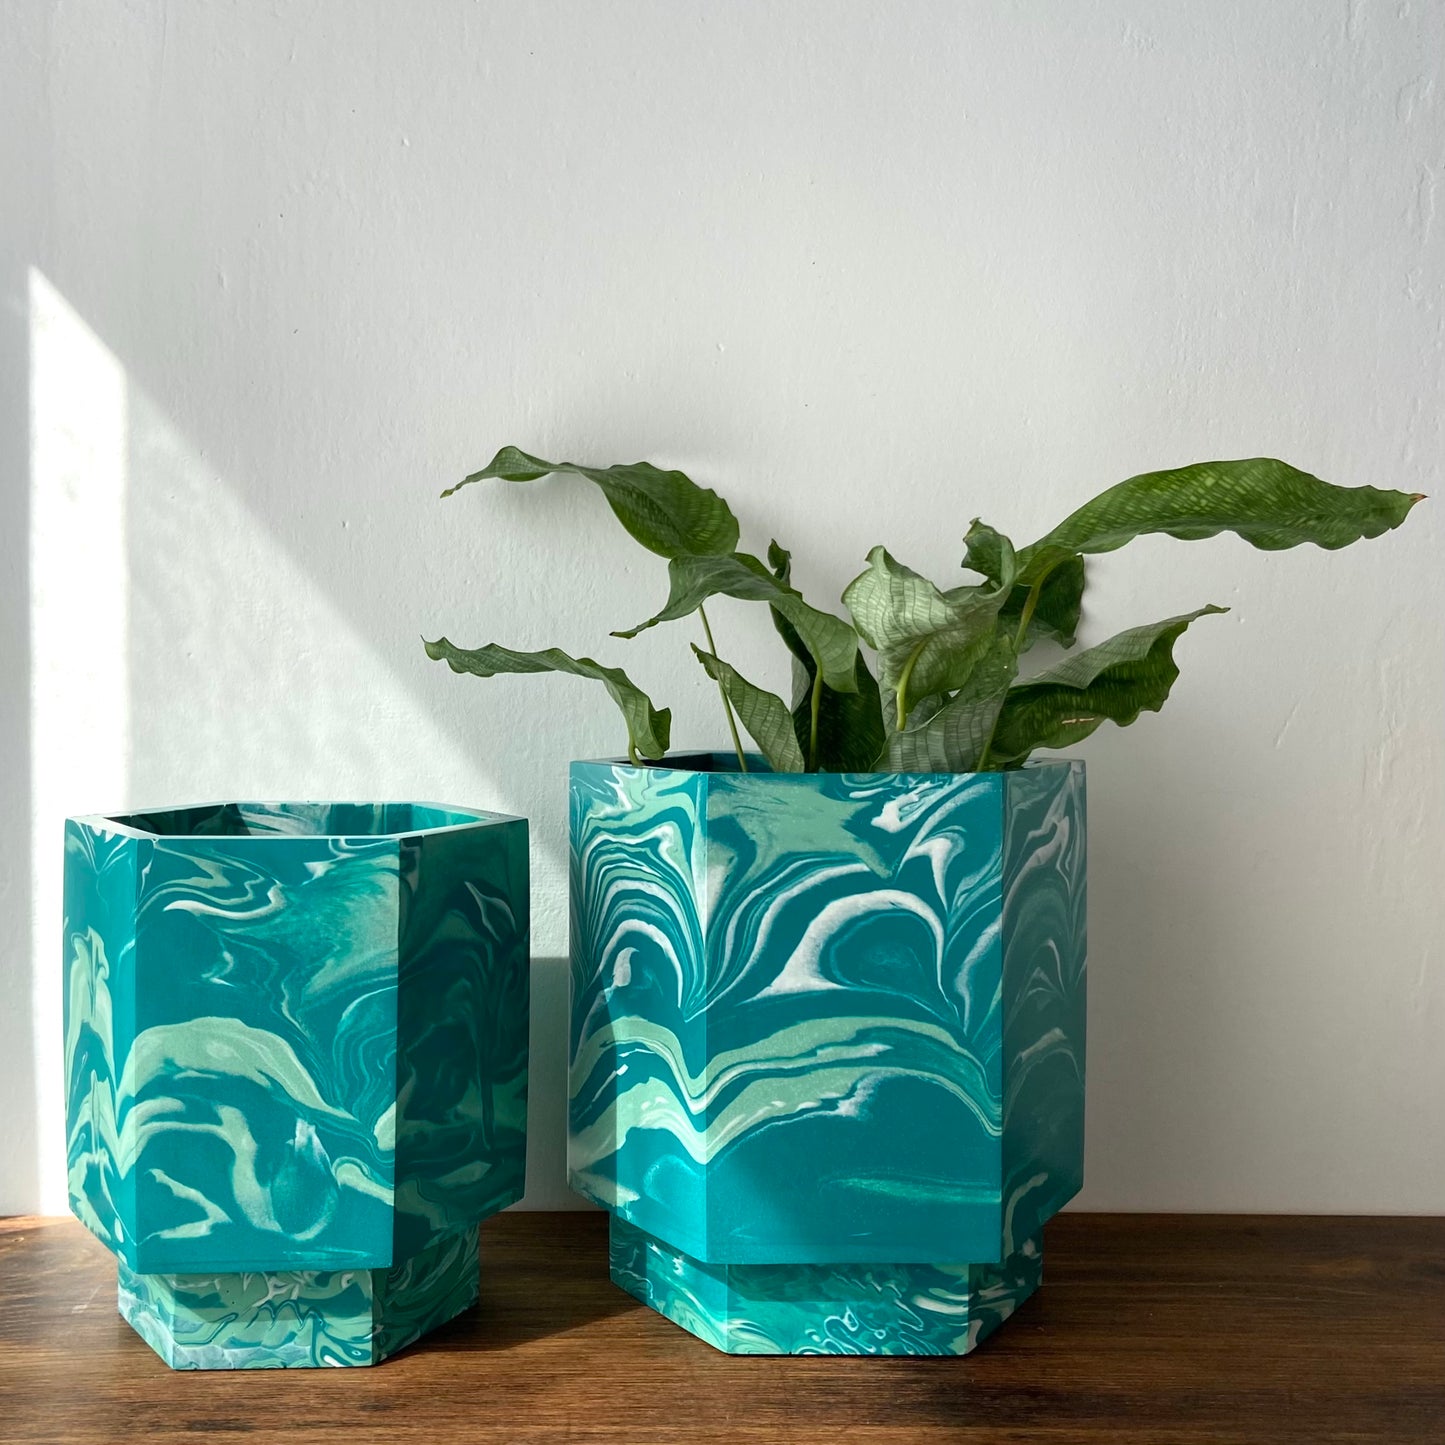 Large marbled plant pot in teal + mint